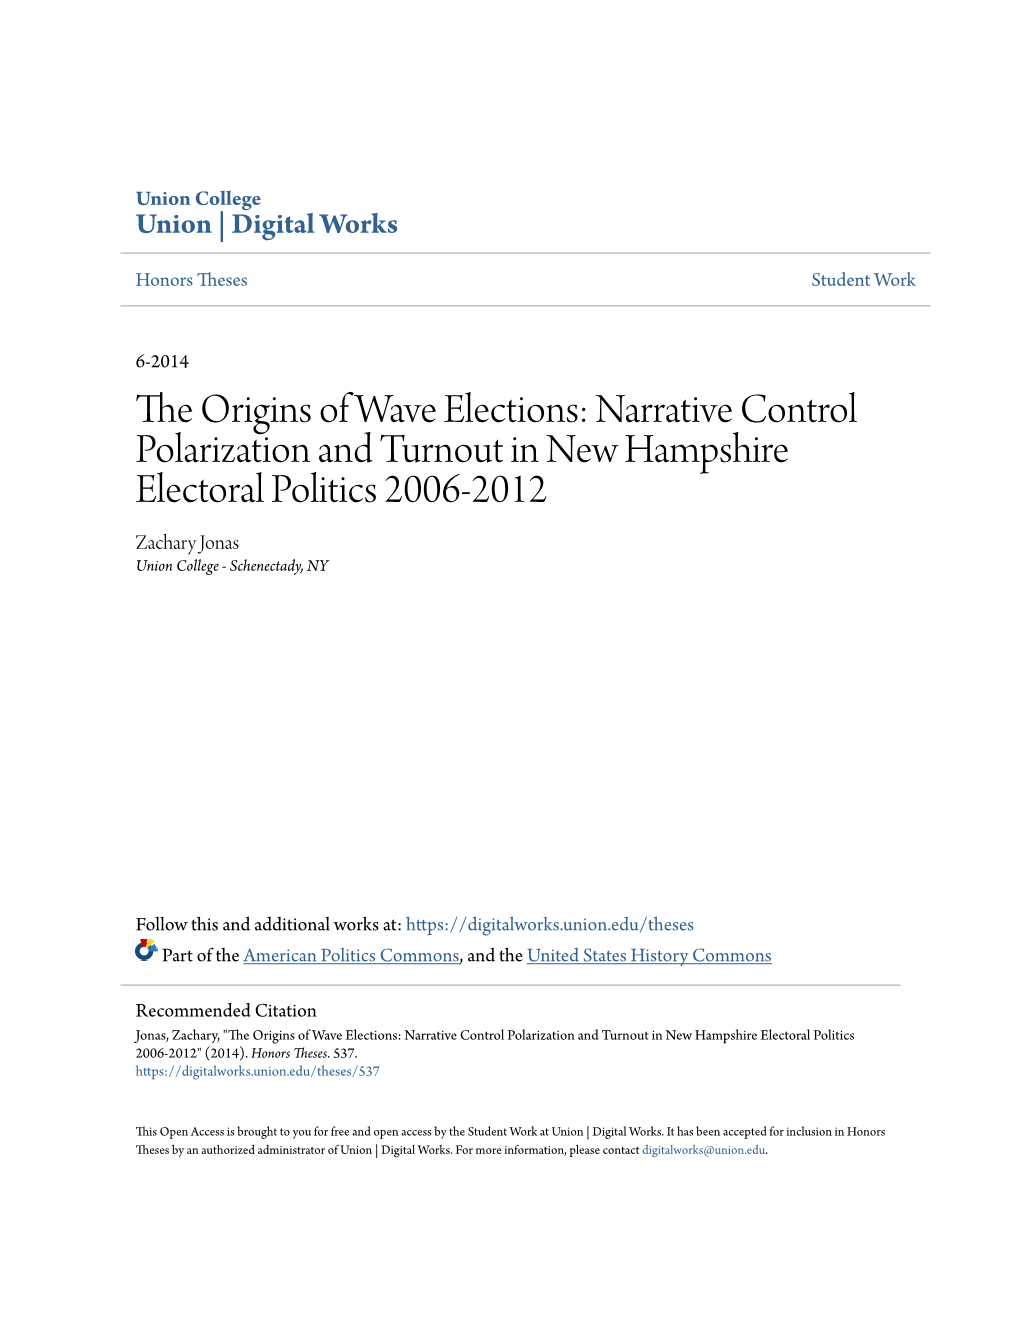 The Origins of Wave Elections: Narrative Control Polarization and Turnout in New Hampshire Electoral Politics 2006-2012 Zachary Jonas Union College - Schenectady, NY